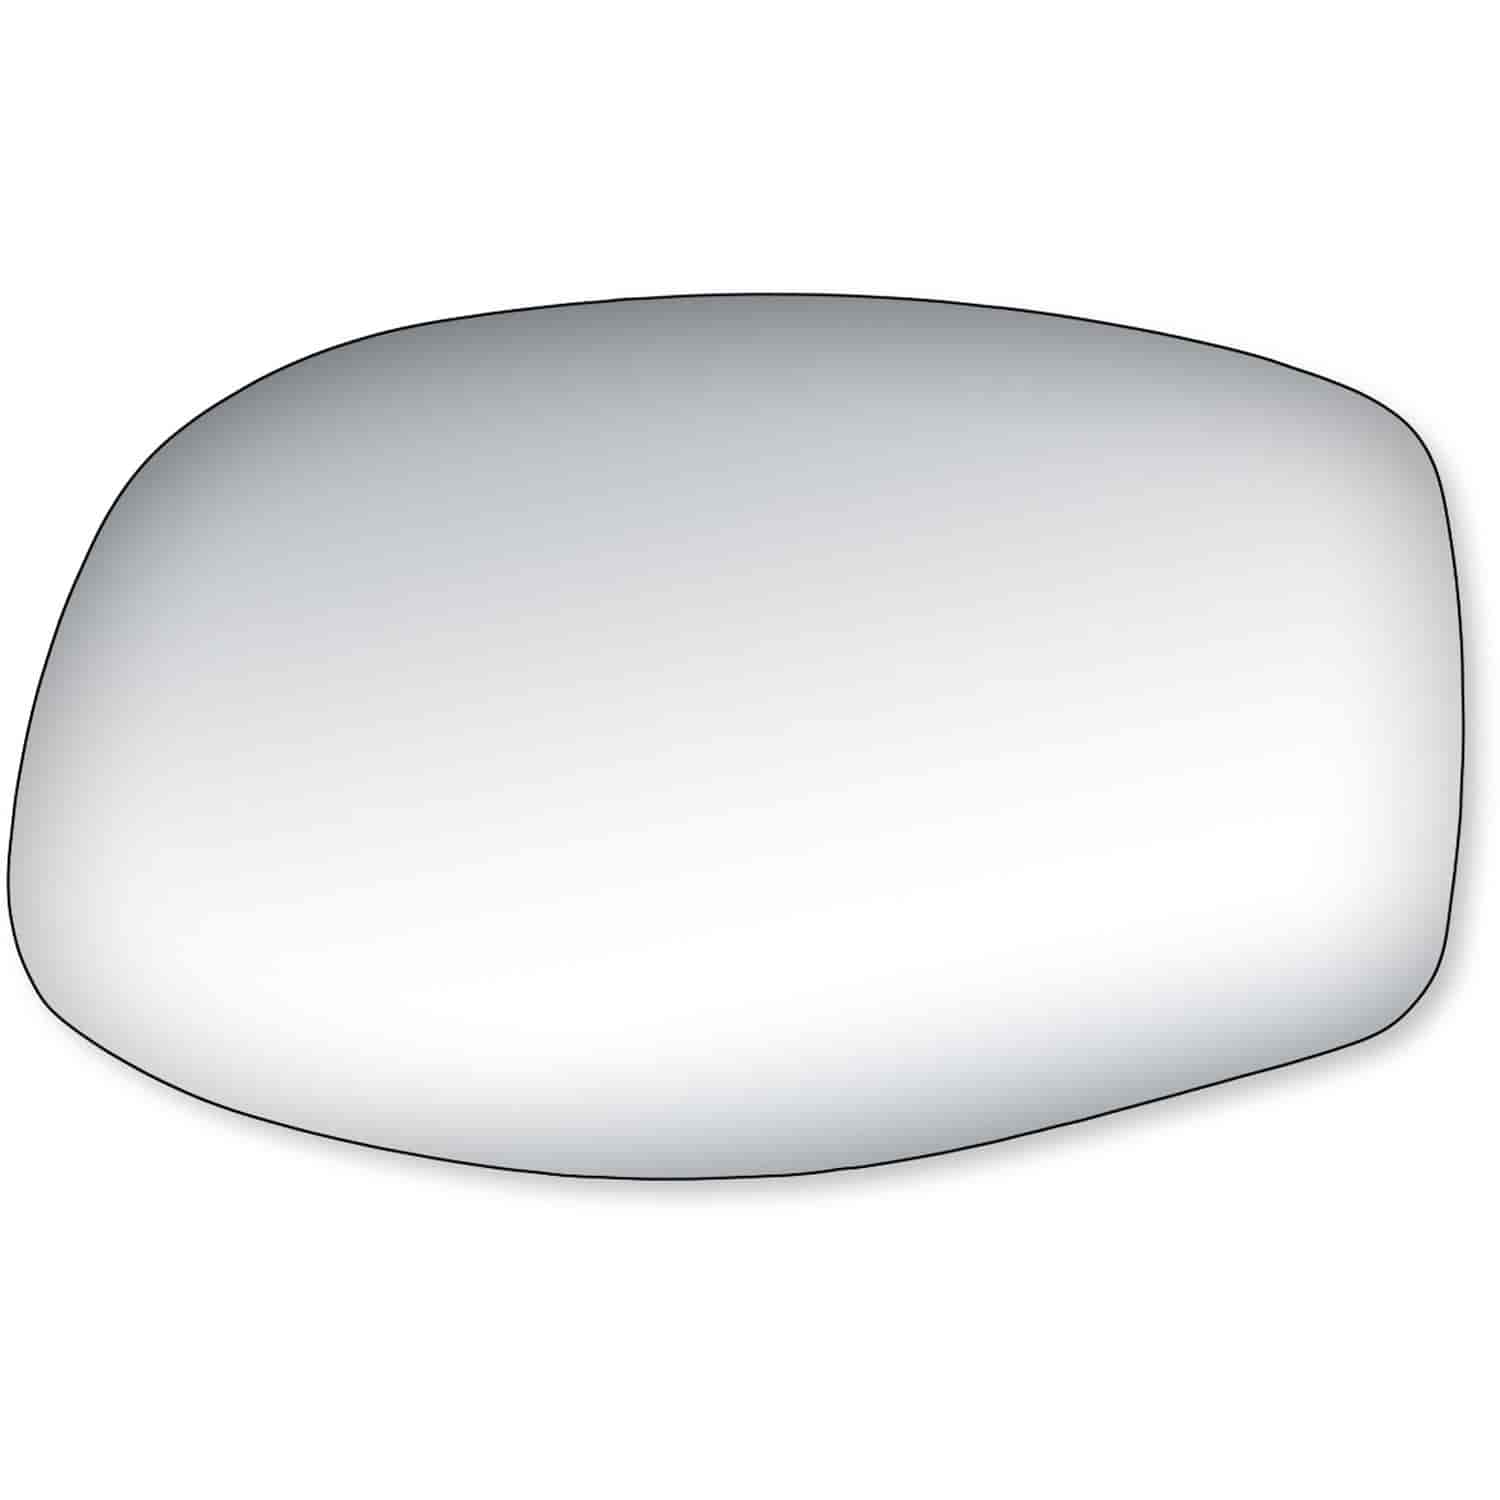 Replacement Glass for 93-97 Ranger Pick-Up ; 94-05 Pick-Up SE Model the glass measures 4 7/16 tall b